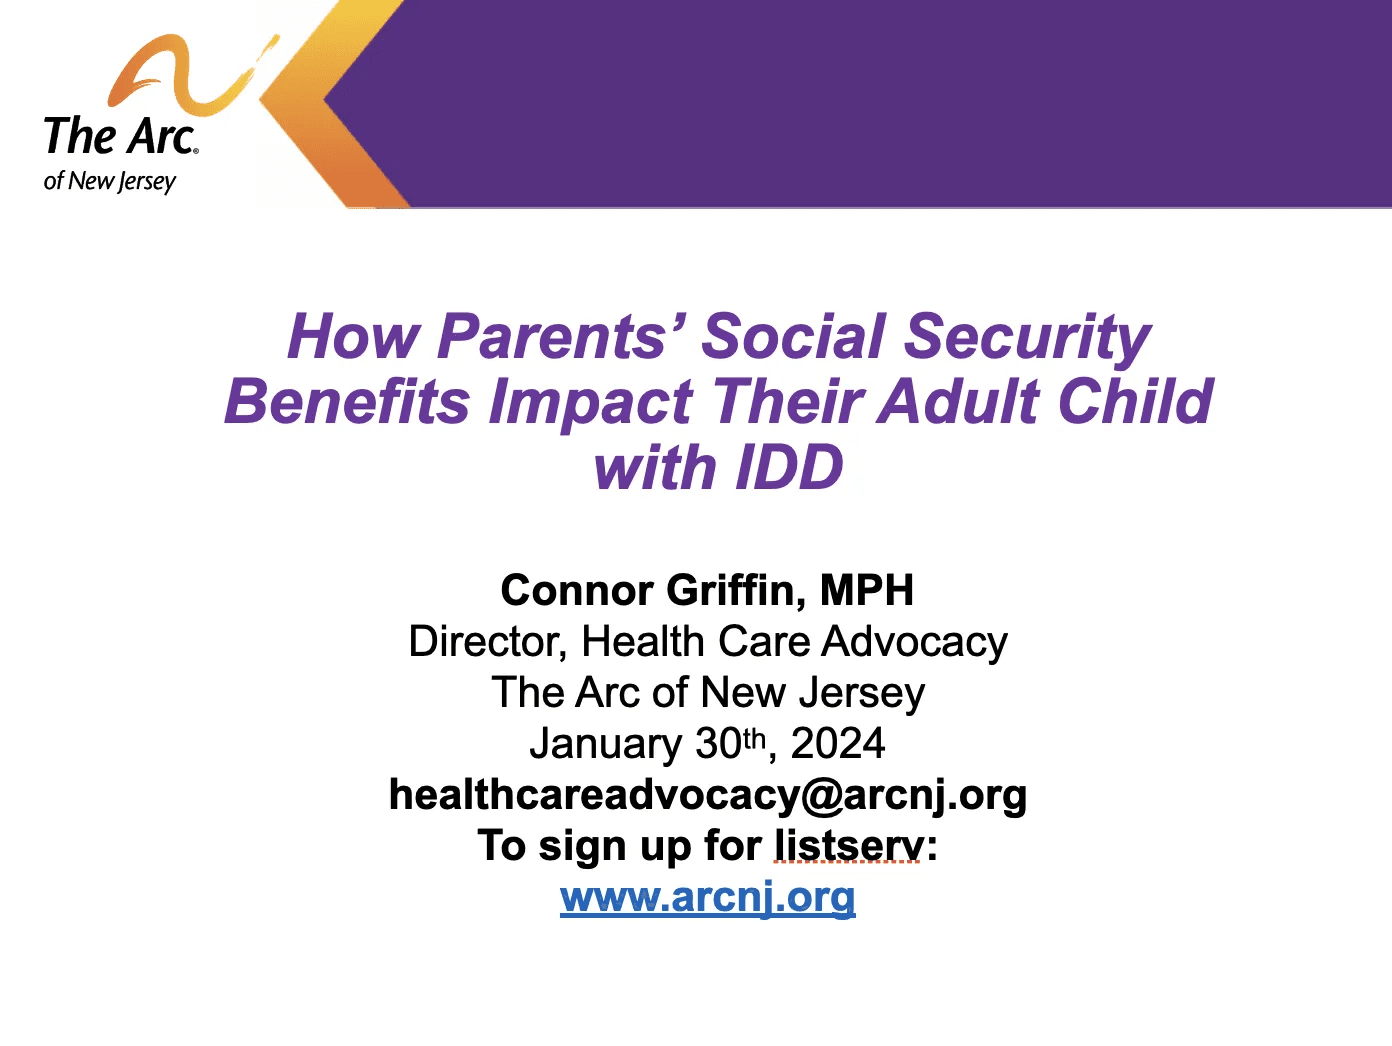 1/30/24 How Parents’ Social Security Benefits Impact Their Adult Child with IDD